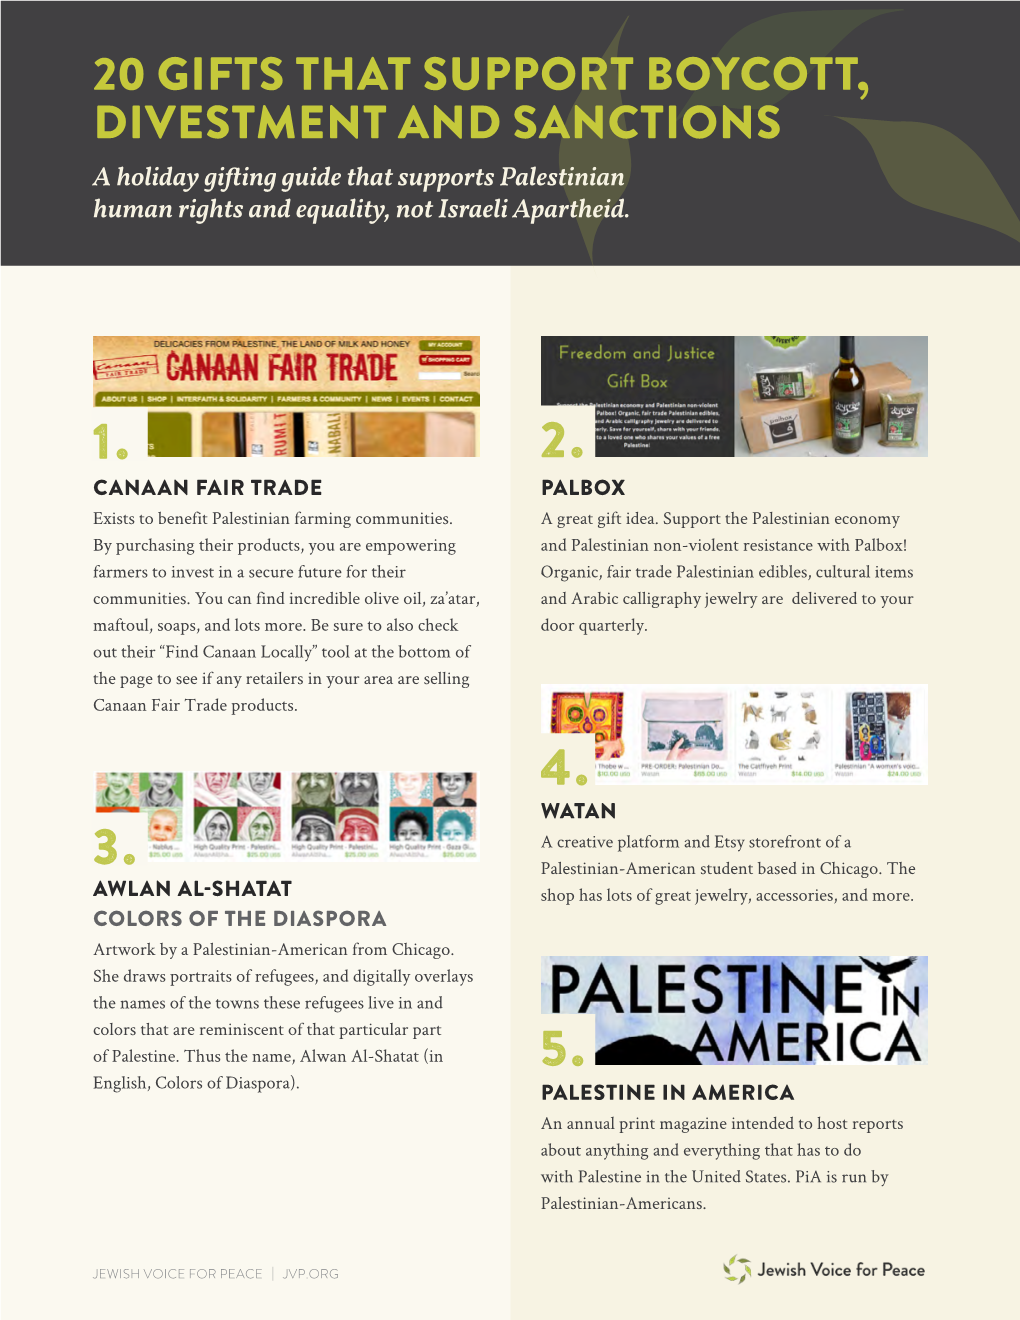 20 Gifts That Support Boycott, Divestment and Sanctions a Holiday Gifting Guide That Supports Palestinian Human Rights and Equality, Not Israeli Apartheid